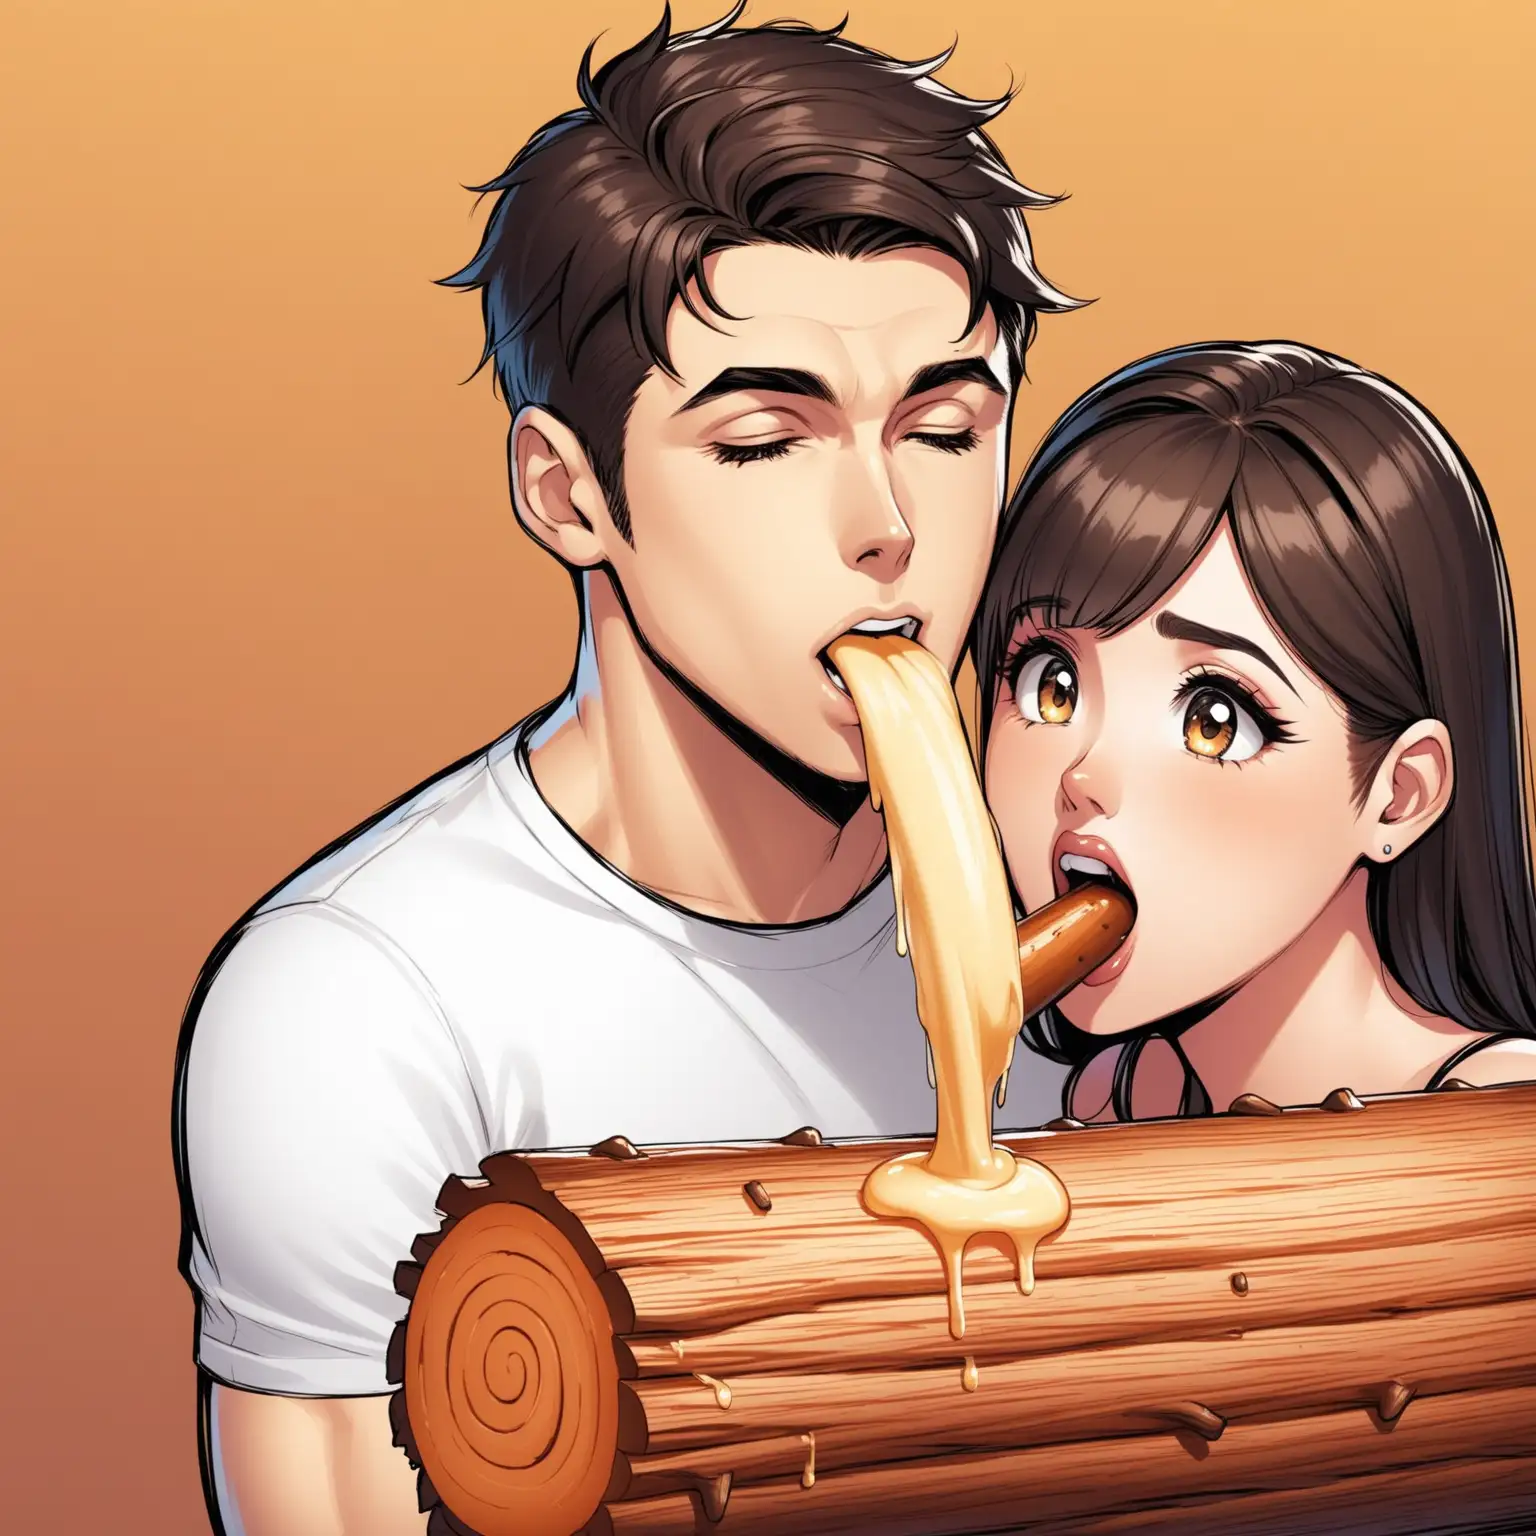 Canadian Man and Brunette Woman Enjoying Bolognese Snack